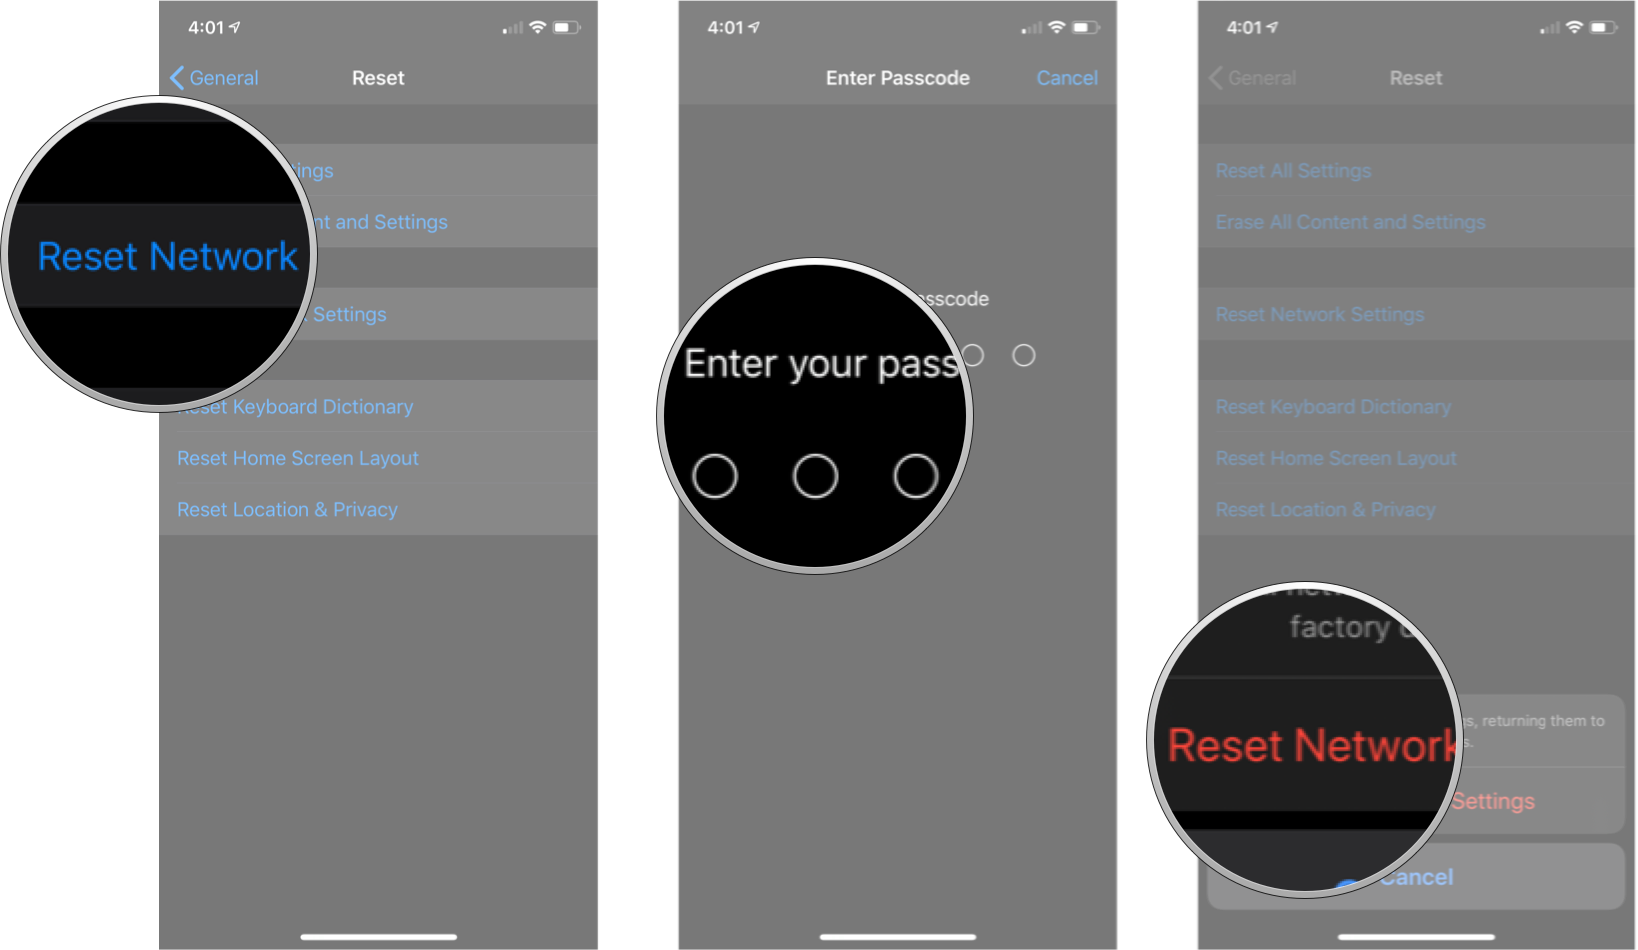 Reset Network Settings on iPhone: Tap Reset Network Settings, enter your passcode, and then tap Reset Network Settings again. 